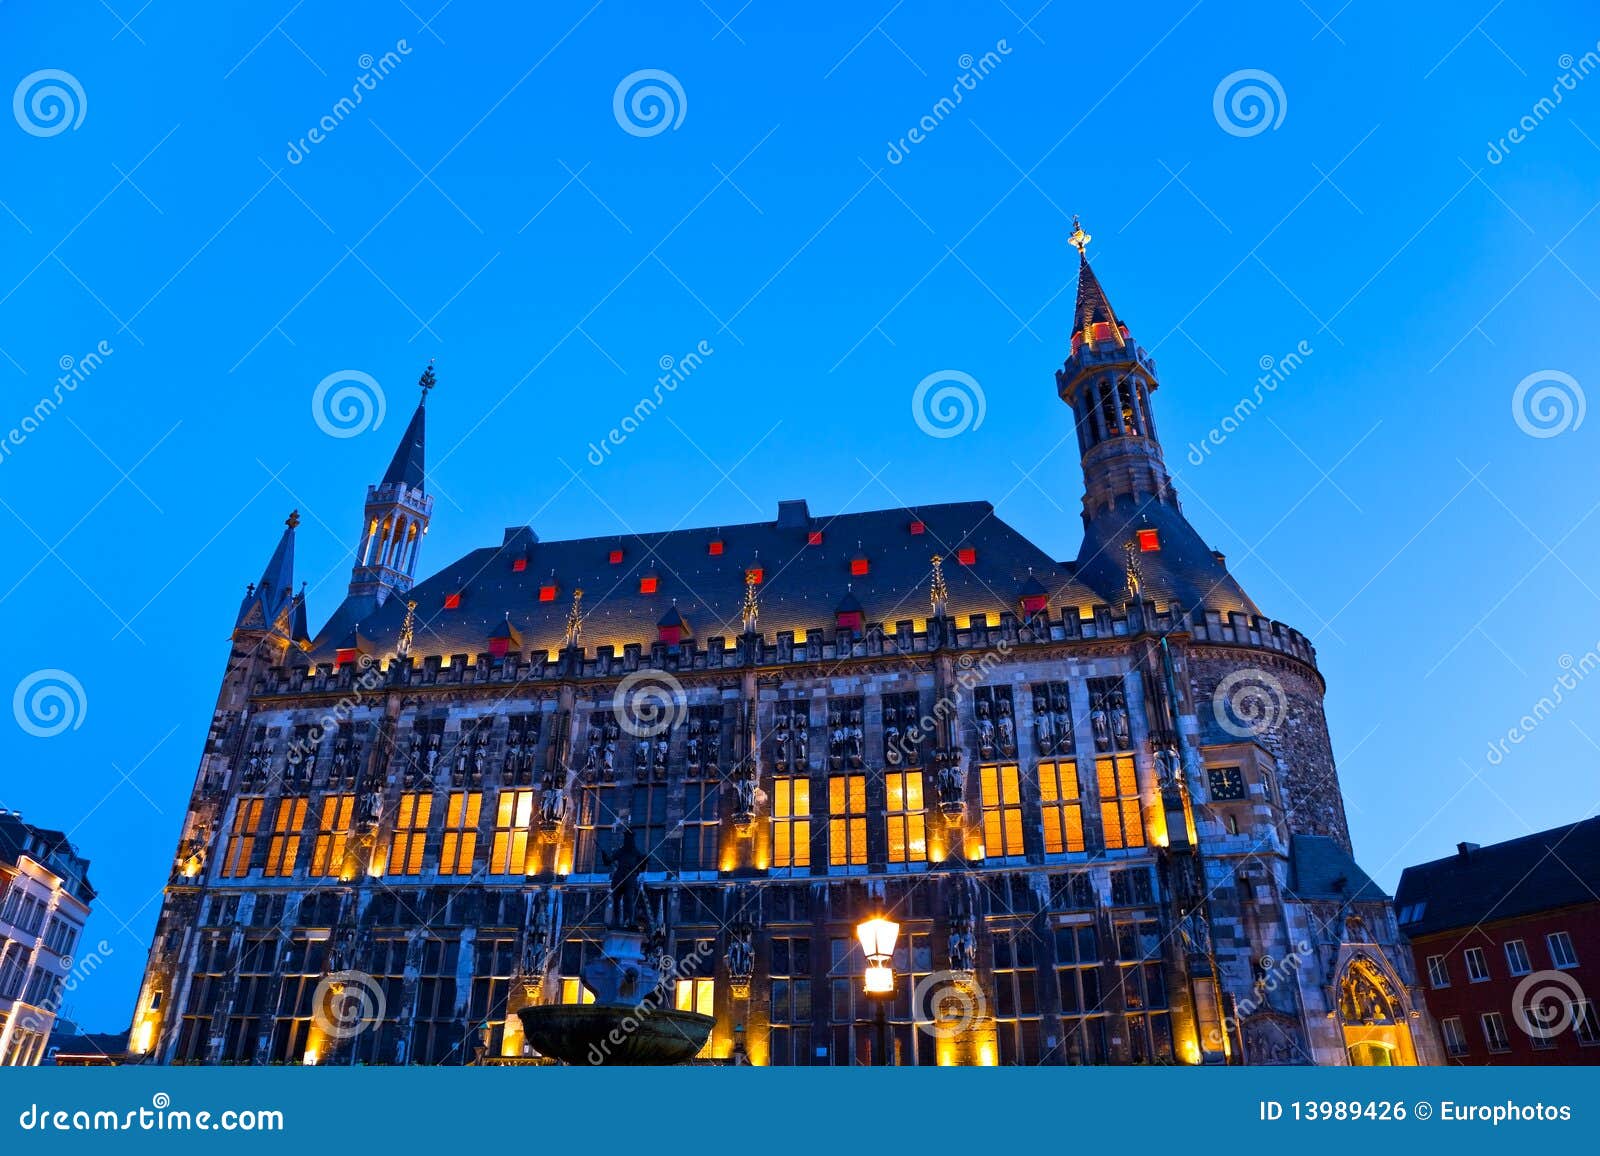 townhall in aachen, germany